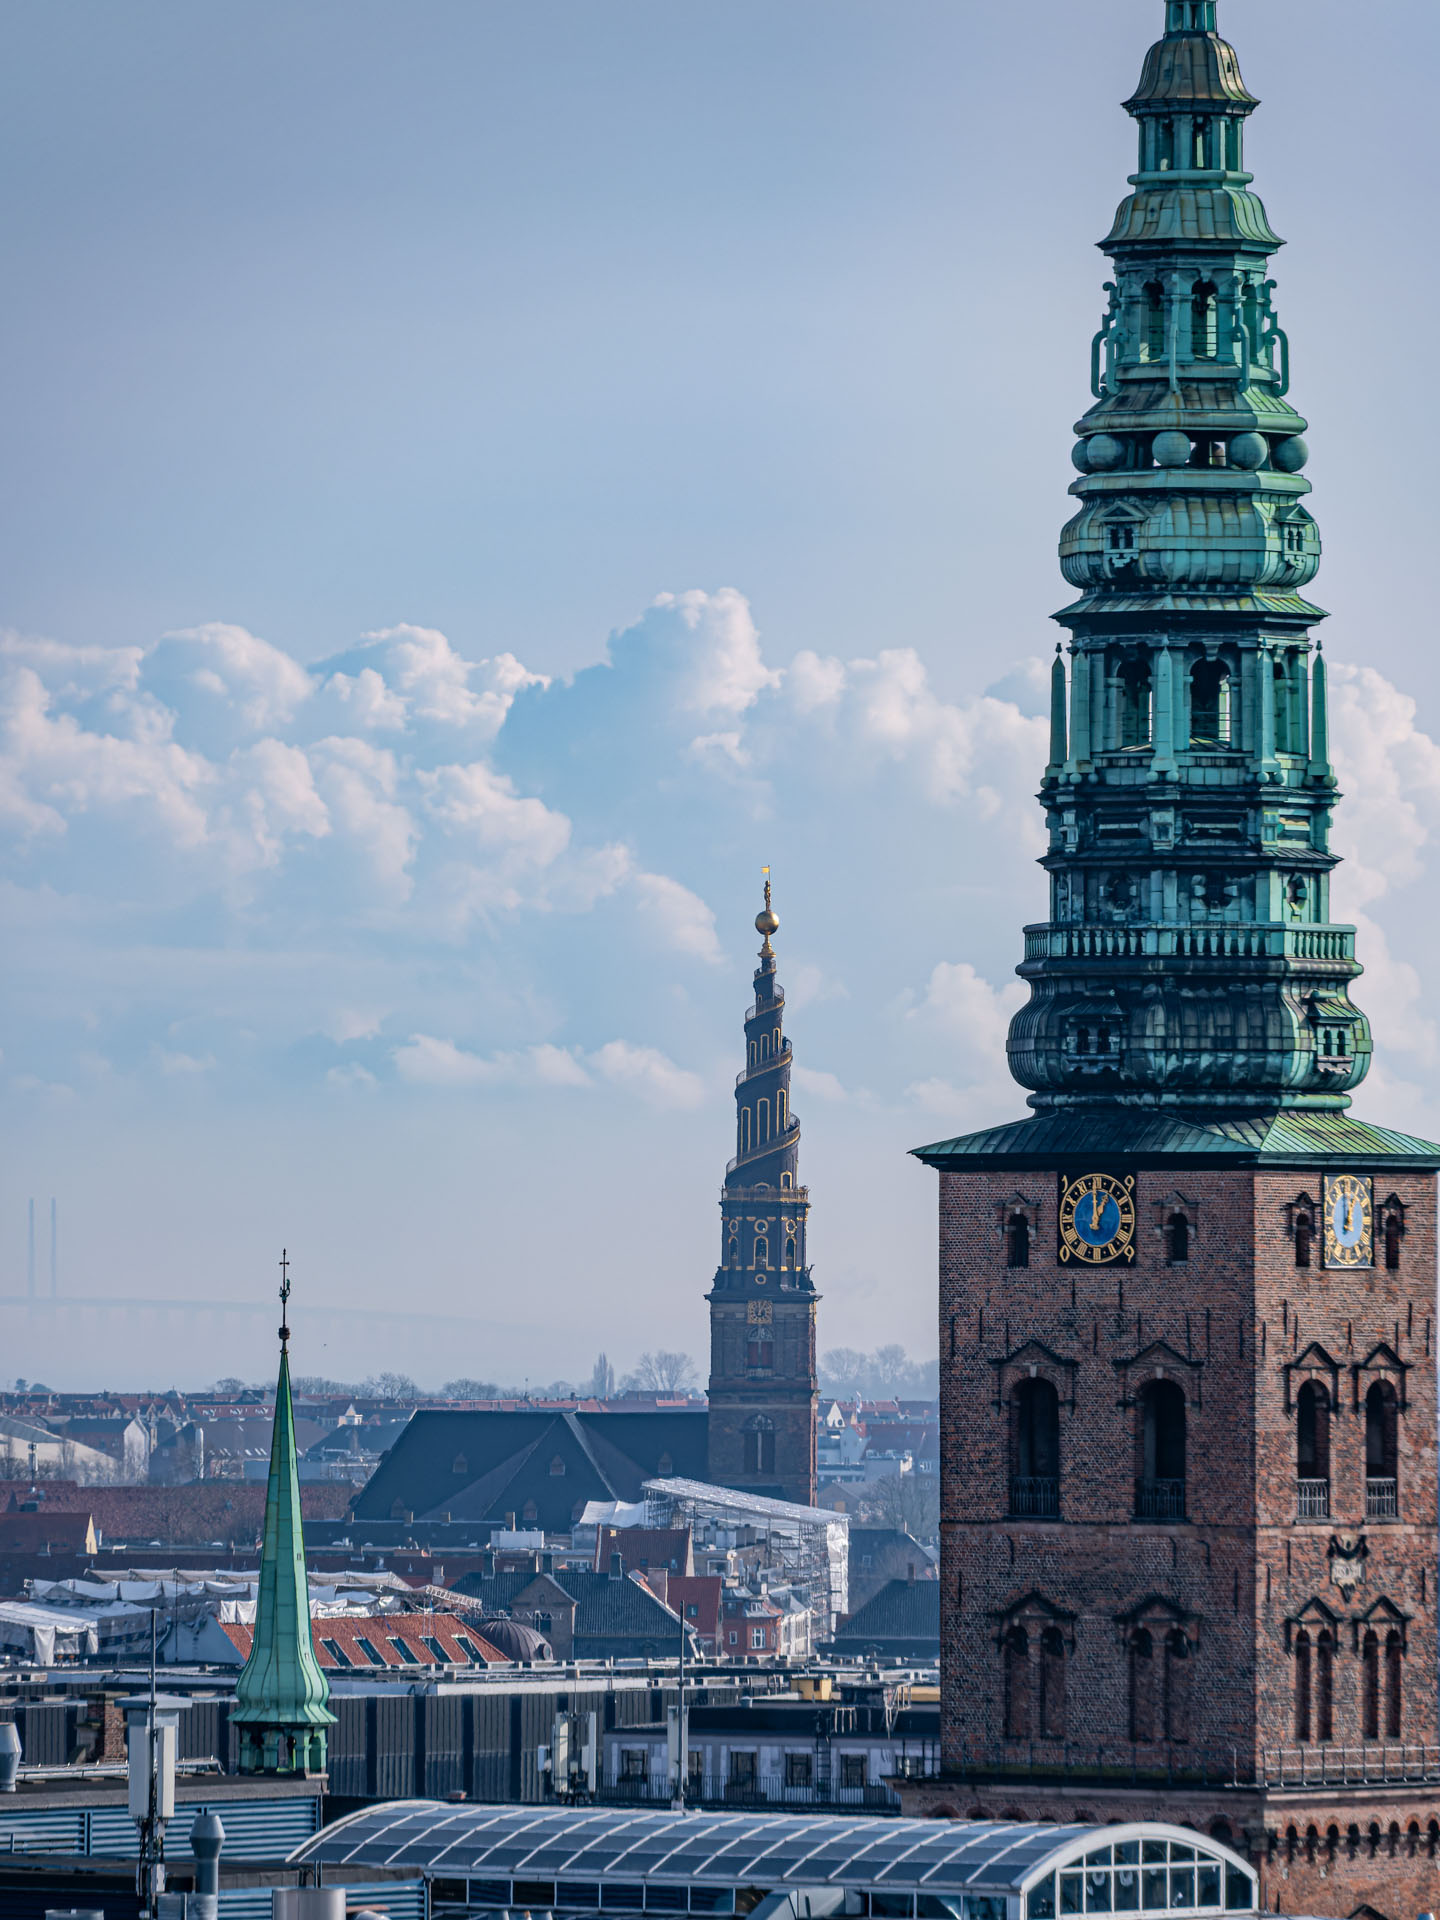 Church of our Saviour viewed from the Round Tower Copenhagen